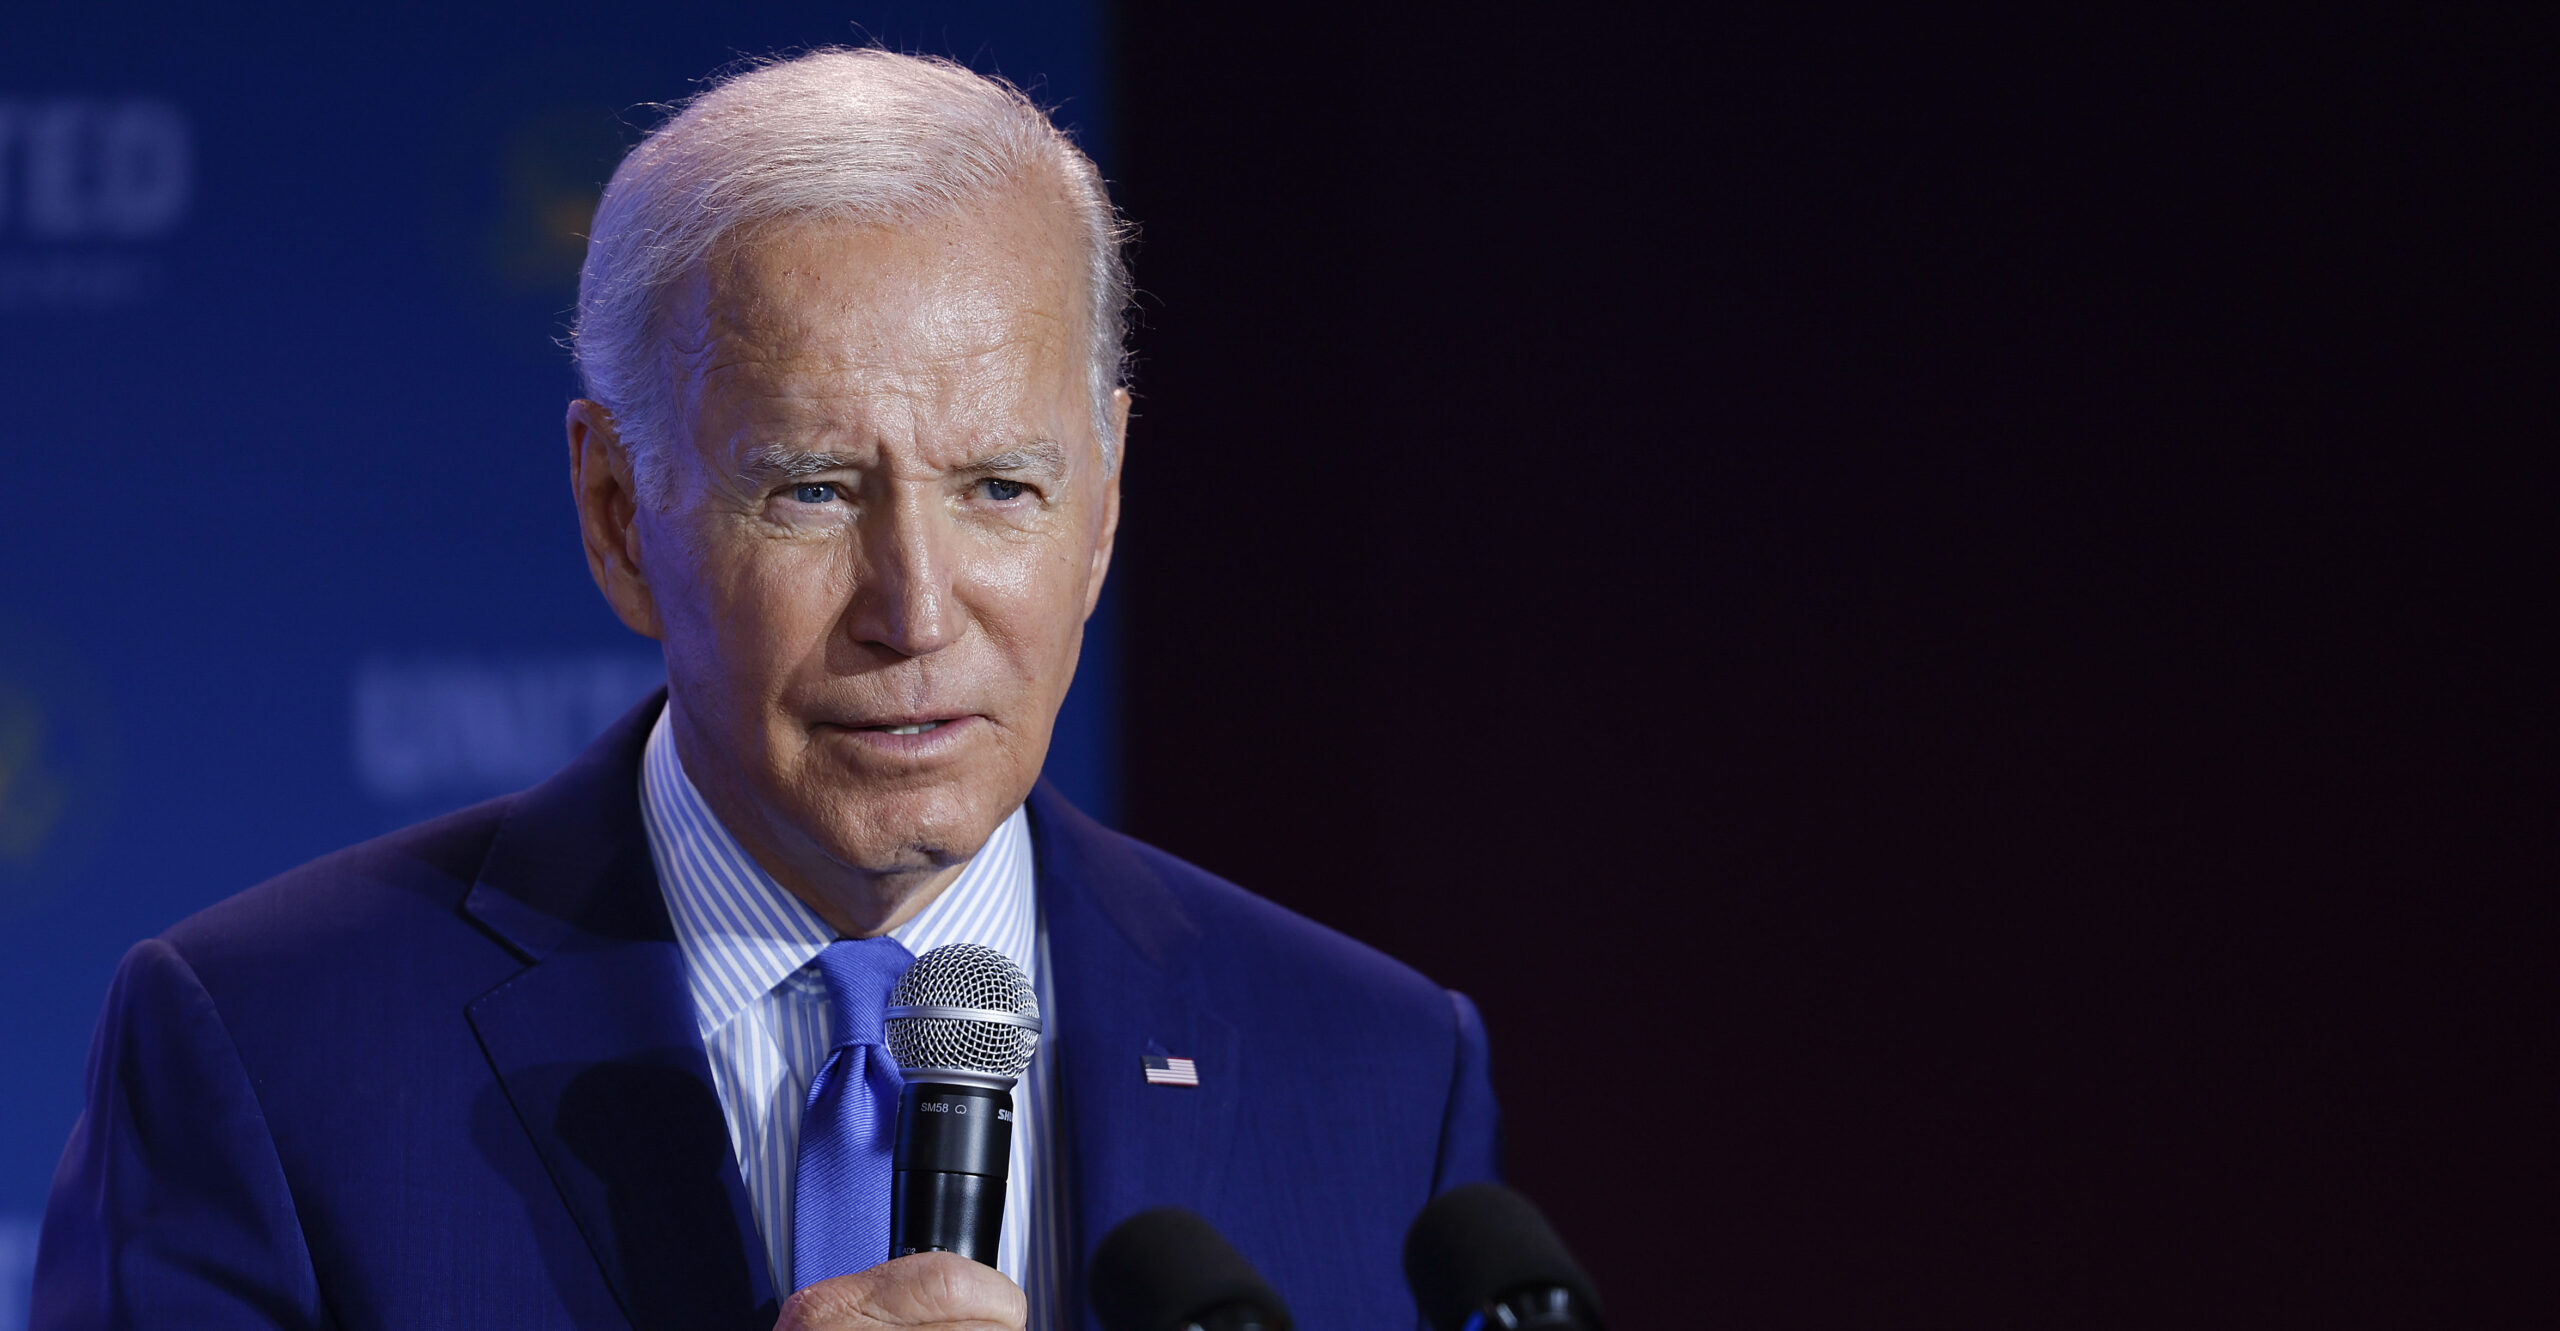 Biden Declares Pandemic ‘Over.’ So What About His COVID&19 Policies?